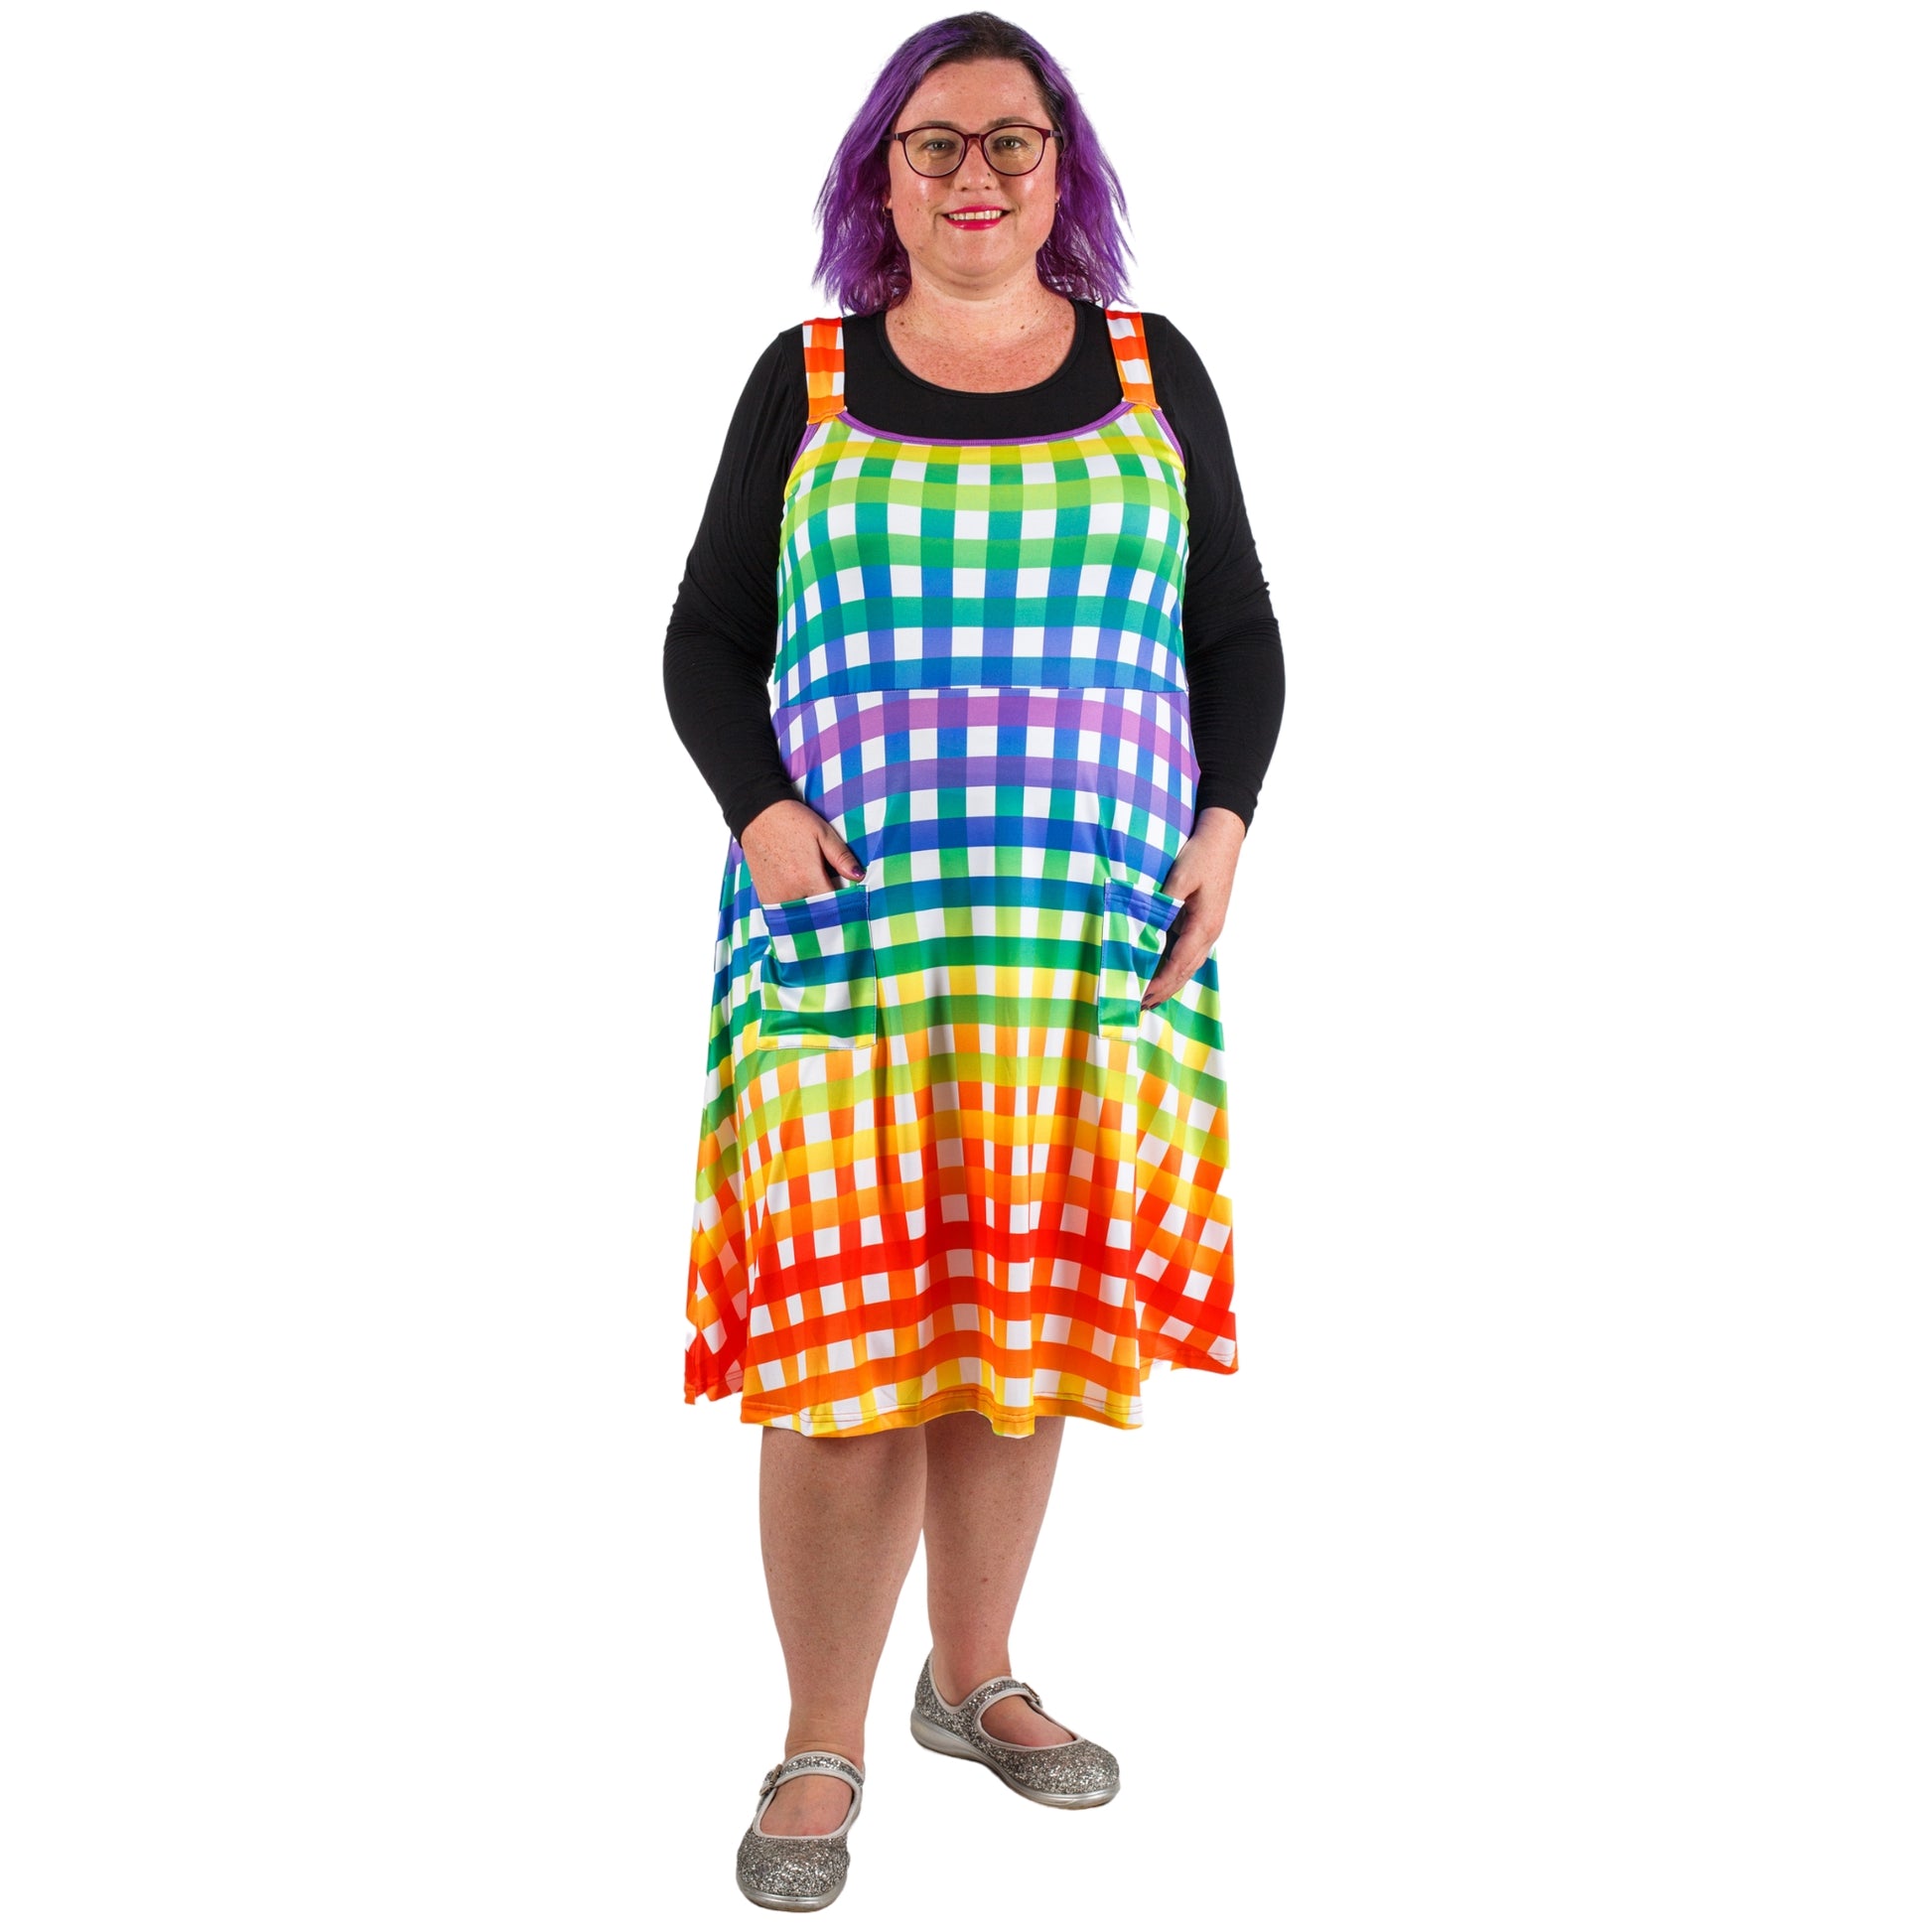 Rainbow Gingham Pinafore by RainbowsAndFairies.com.au (Check - Pride - Psychedelic - Dress With Pockets - Pinny - Kitsch - Vintage Inspired) - SKU: CL_PFORE_GINGH_RBW - Pic-02